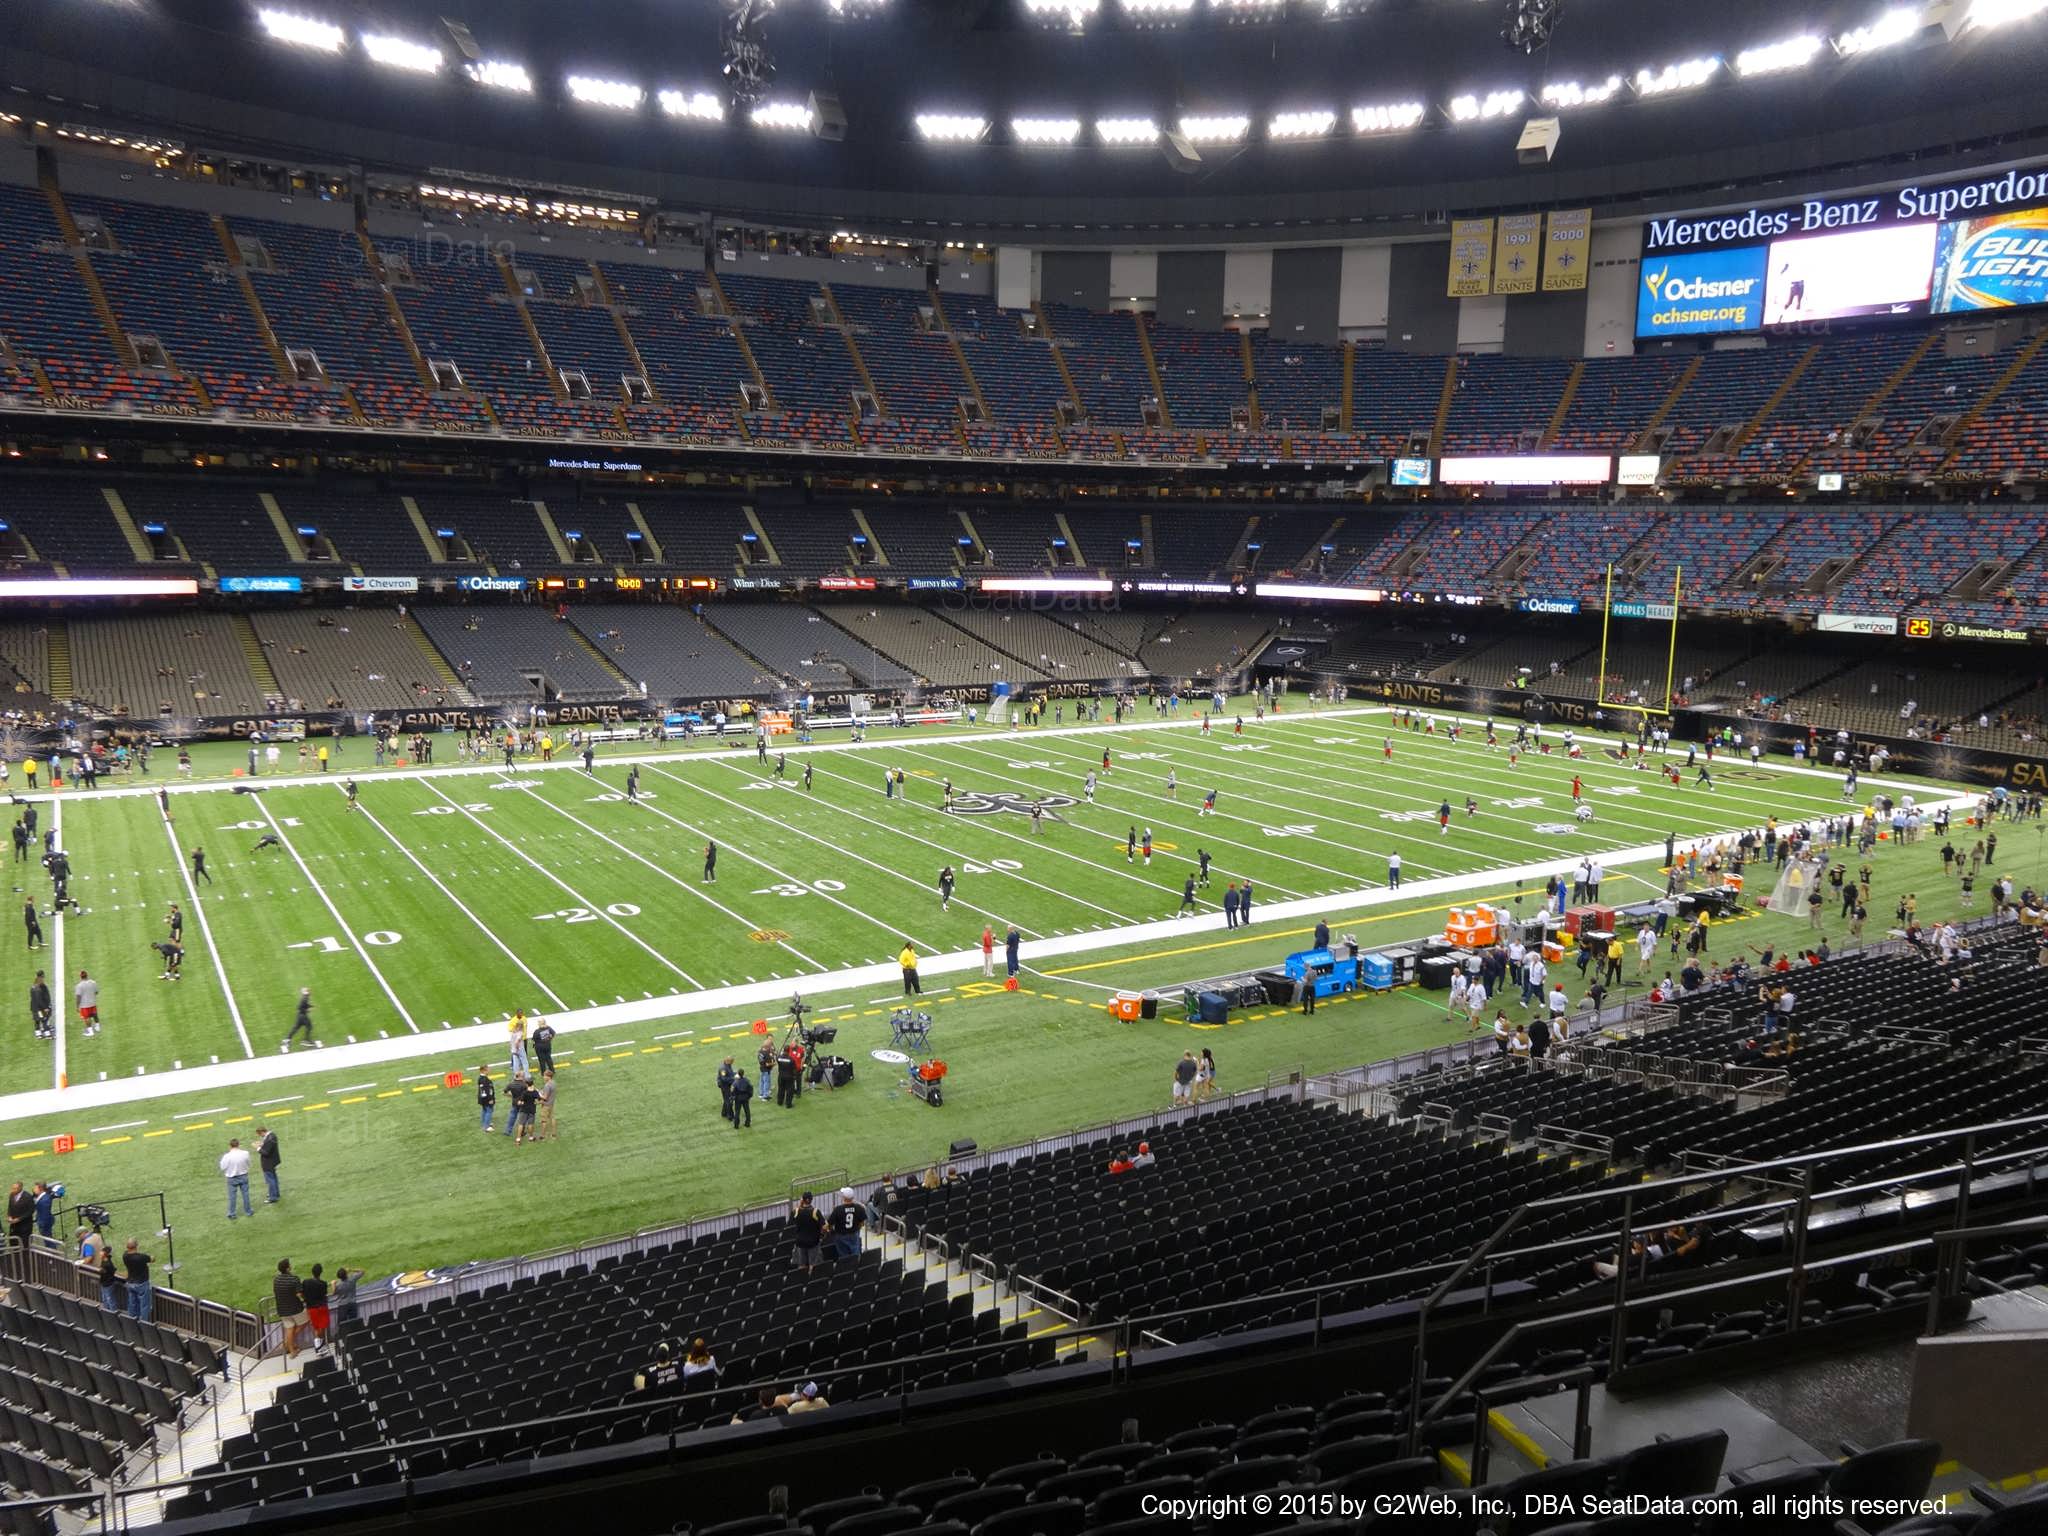 Seat view from section 316 at the Mercedes-Benz Superdome, home of the New Orleans Saints